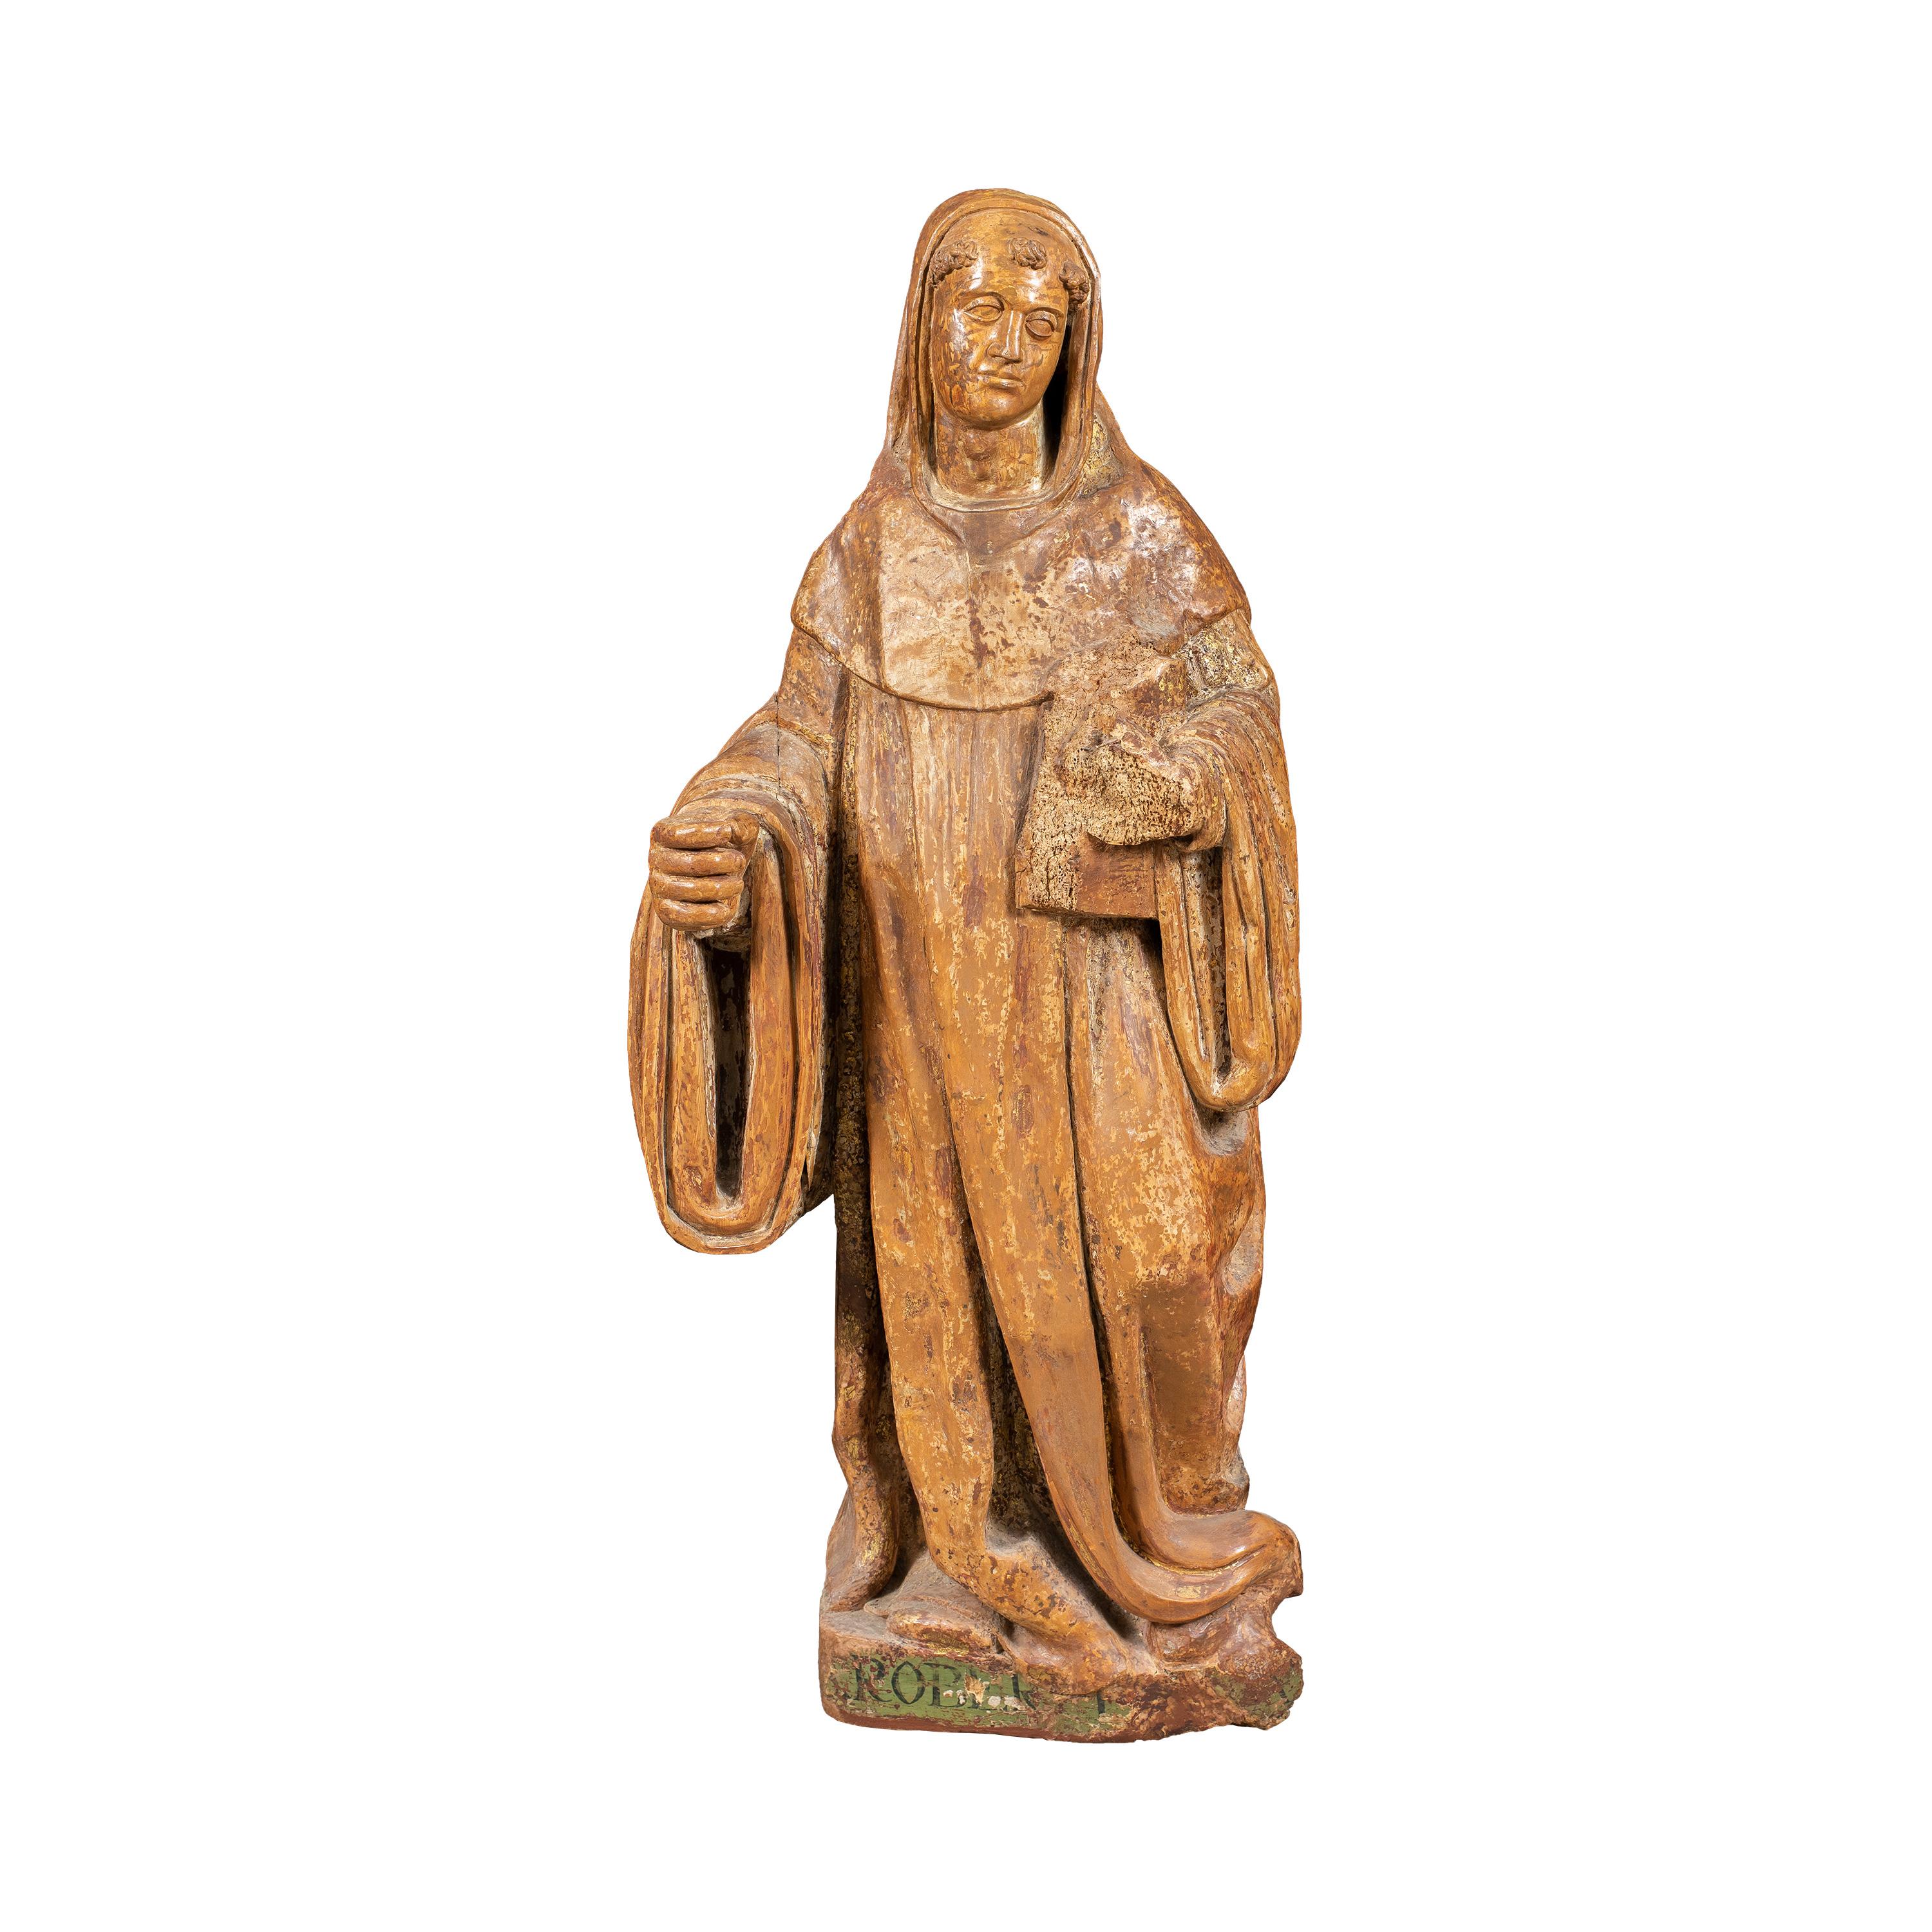 Unknown Figurative Sculpture - 16th century Italian carved wood sculpture - Saint Robert - Gilded Painted